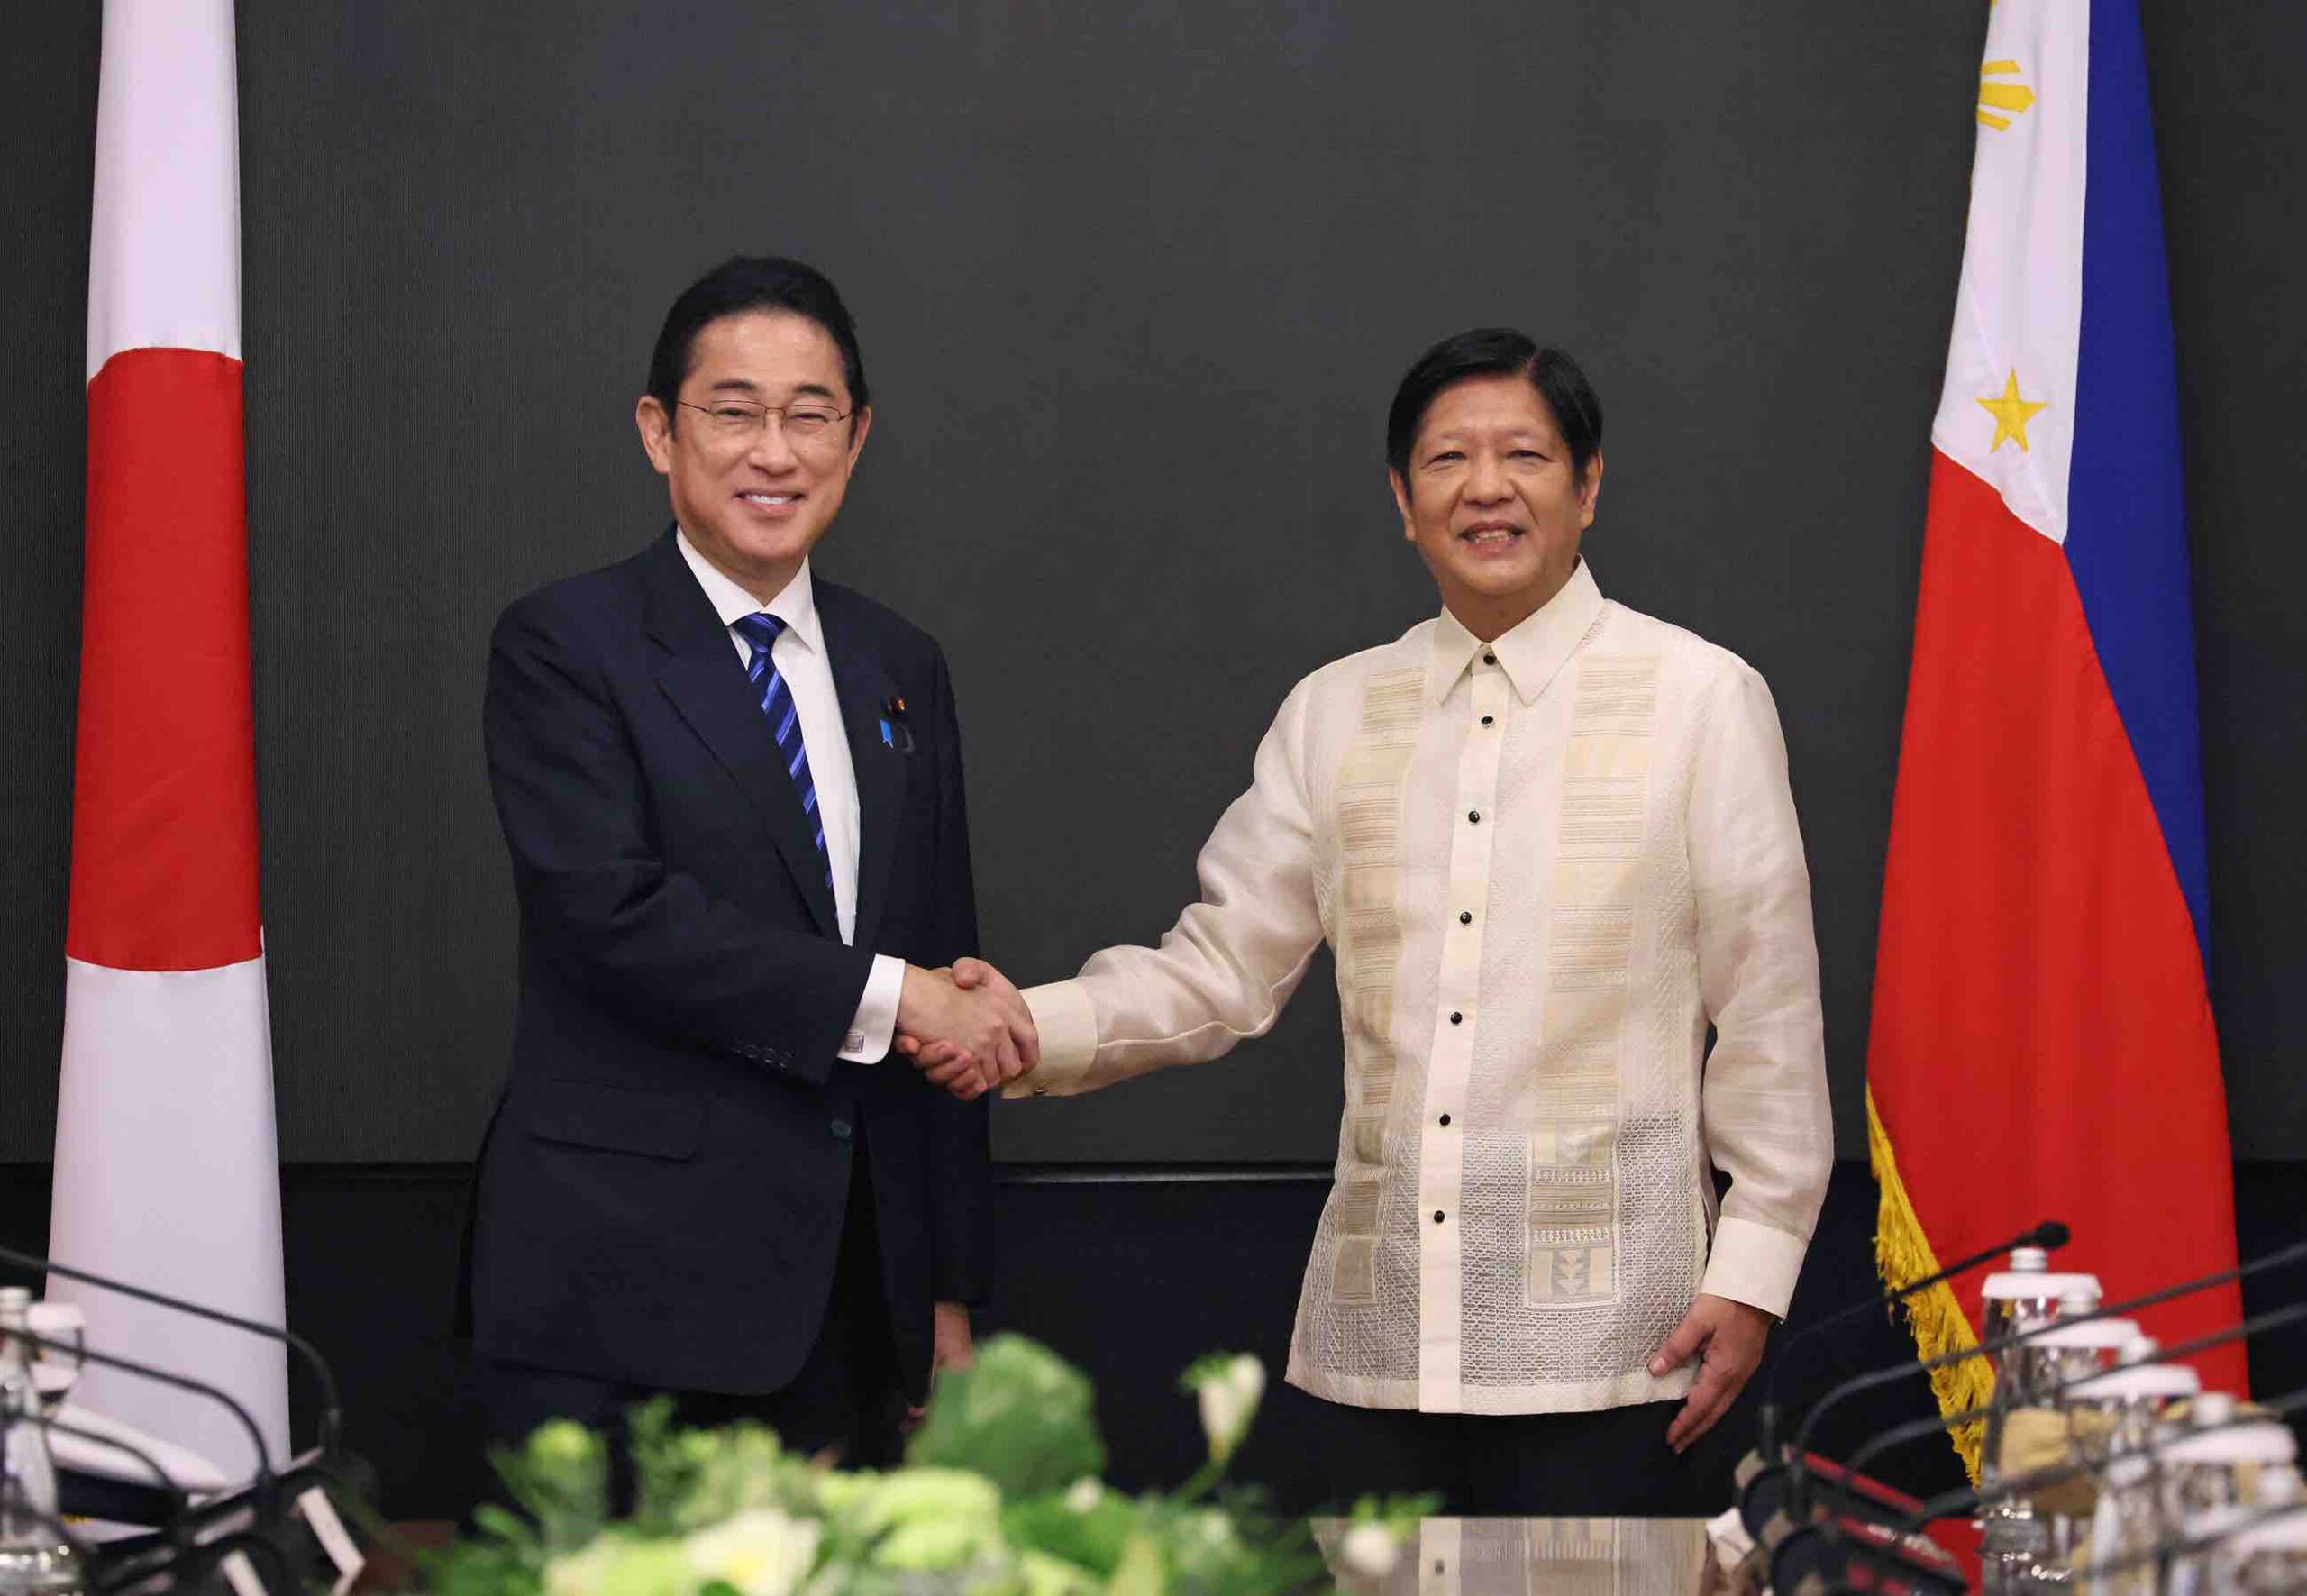 Prime Ministers of Japan and the Philippines shaking hands